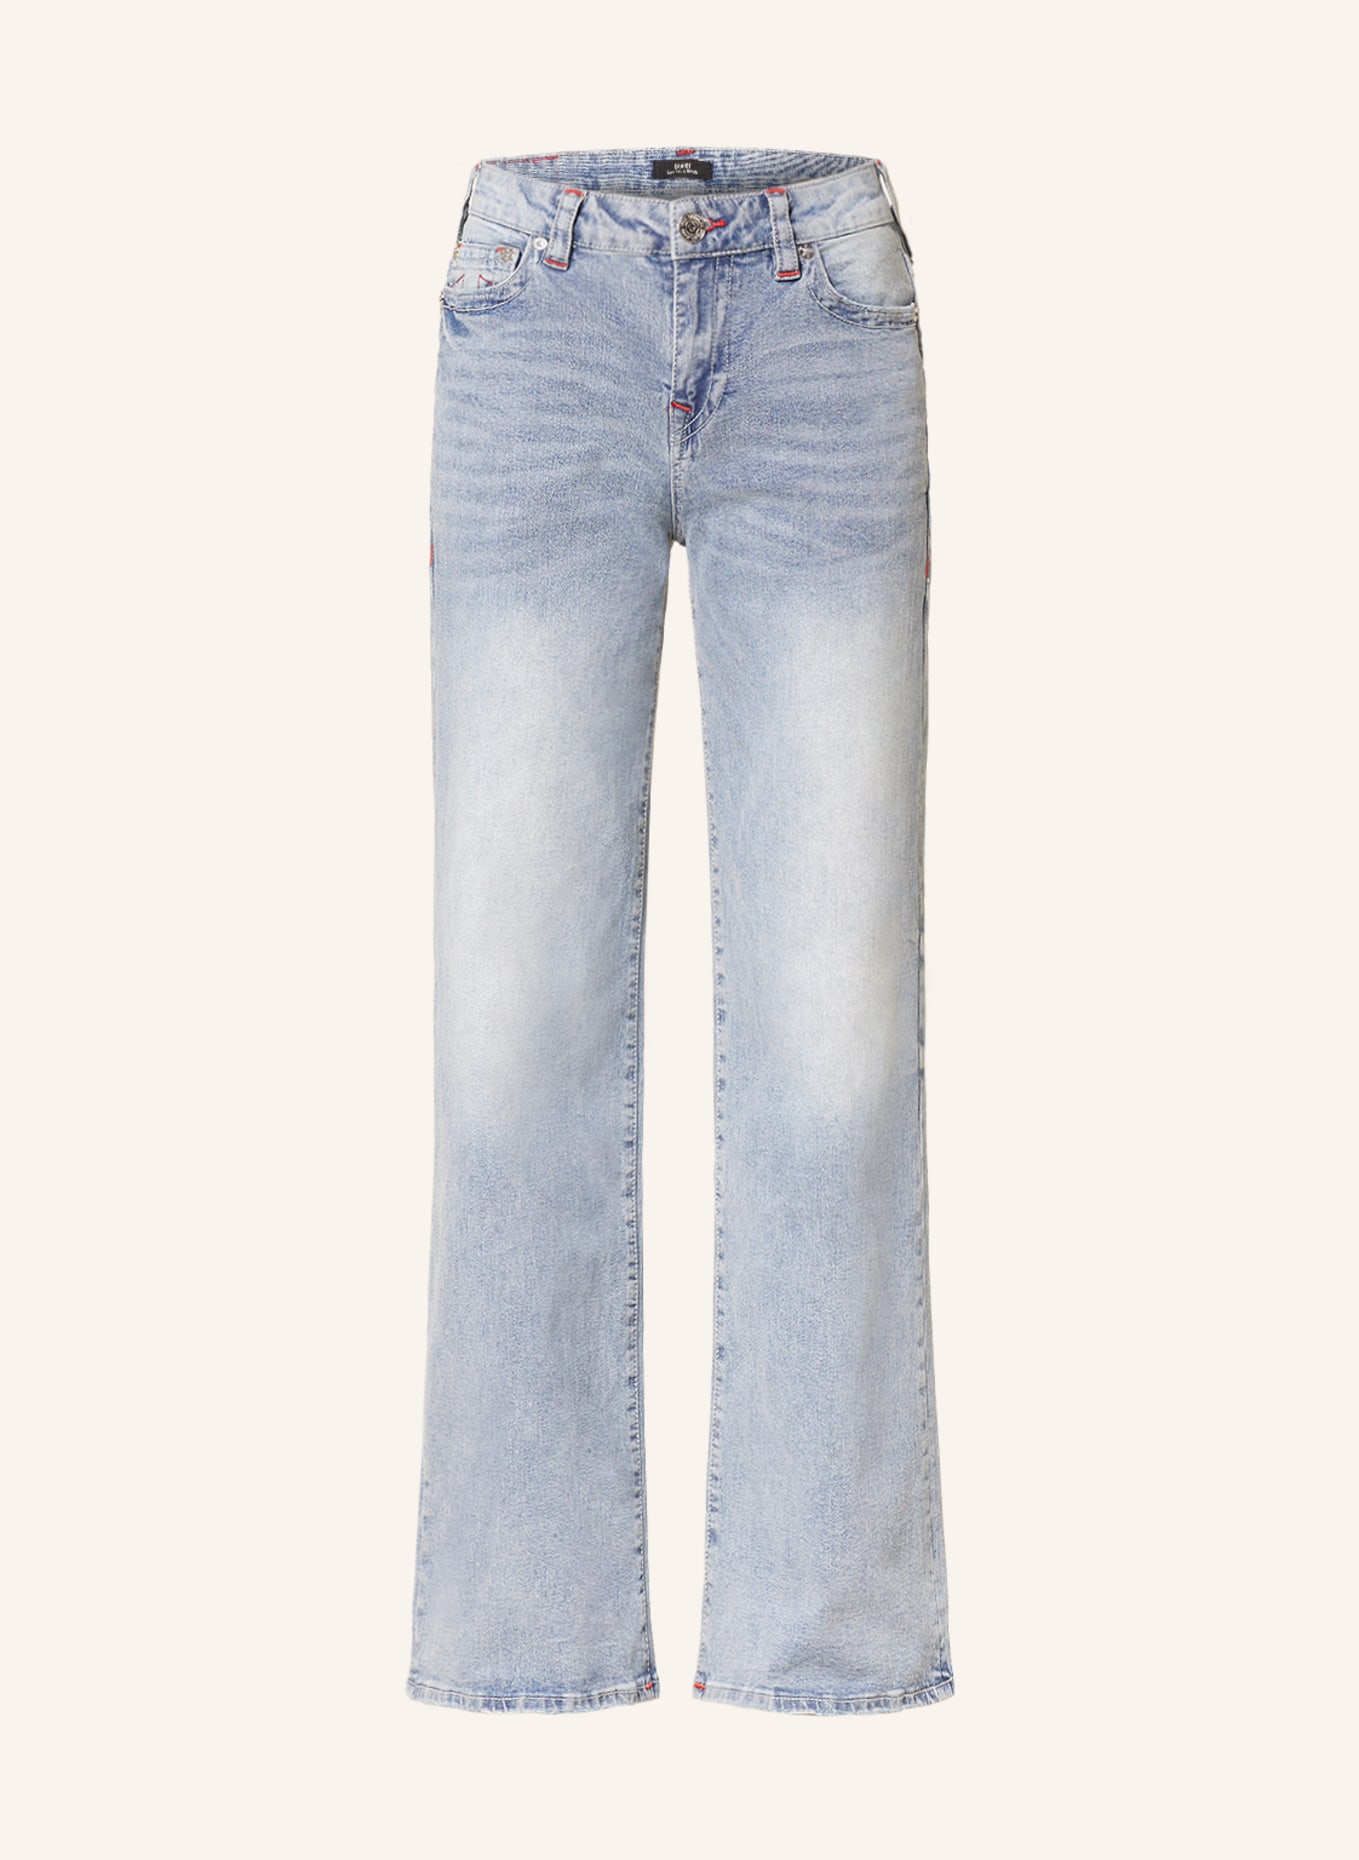 TRUE RELIGION Flared jeans BOBBY in idzm used washed blue